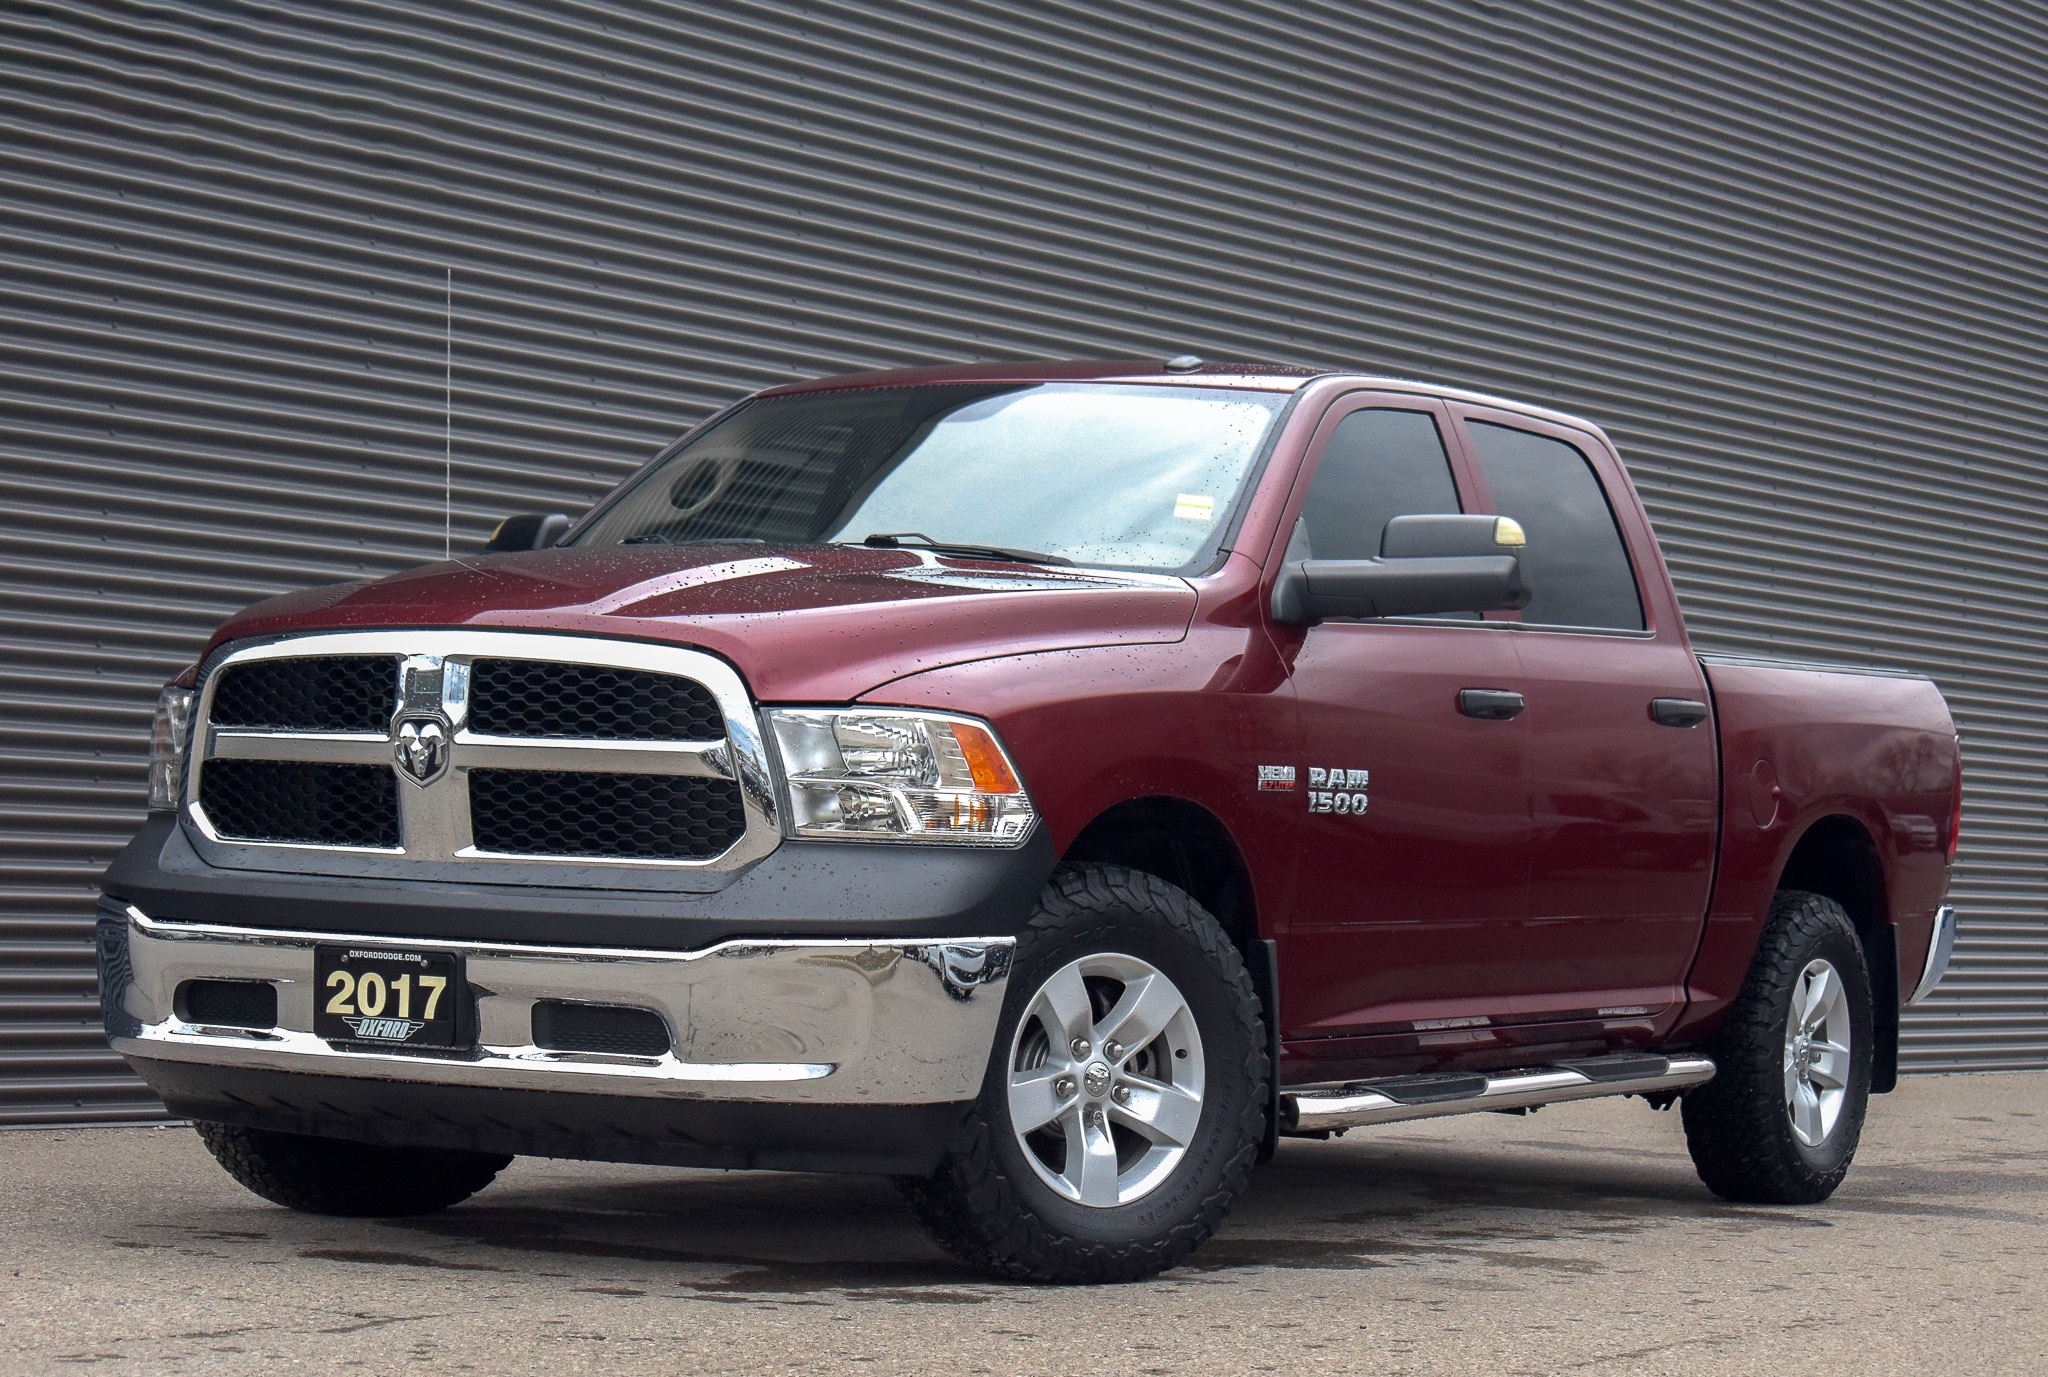 2017 Ram 1500 ST Rust And Undercoated, Low Kms, One Owner